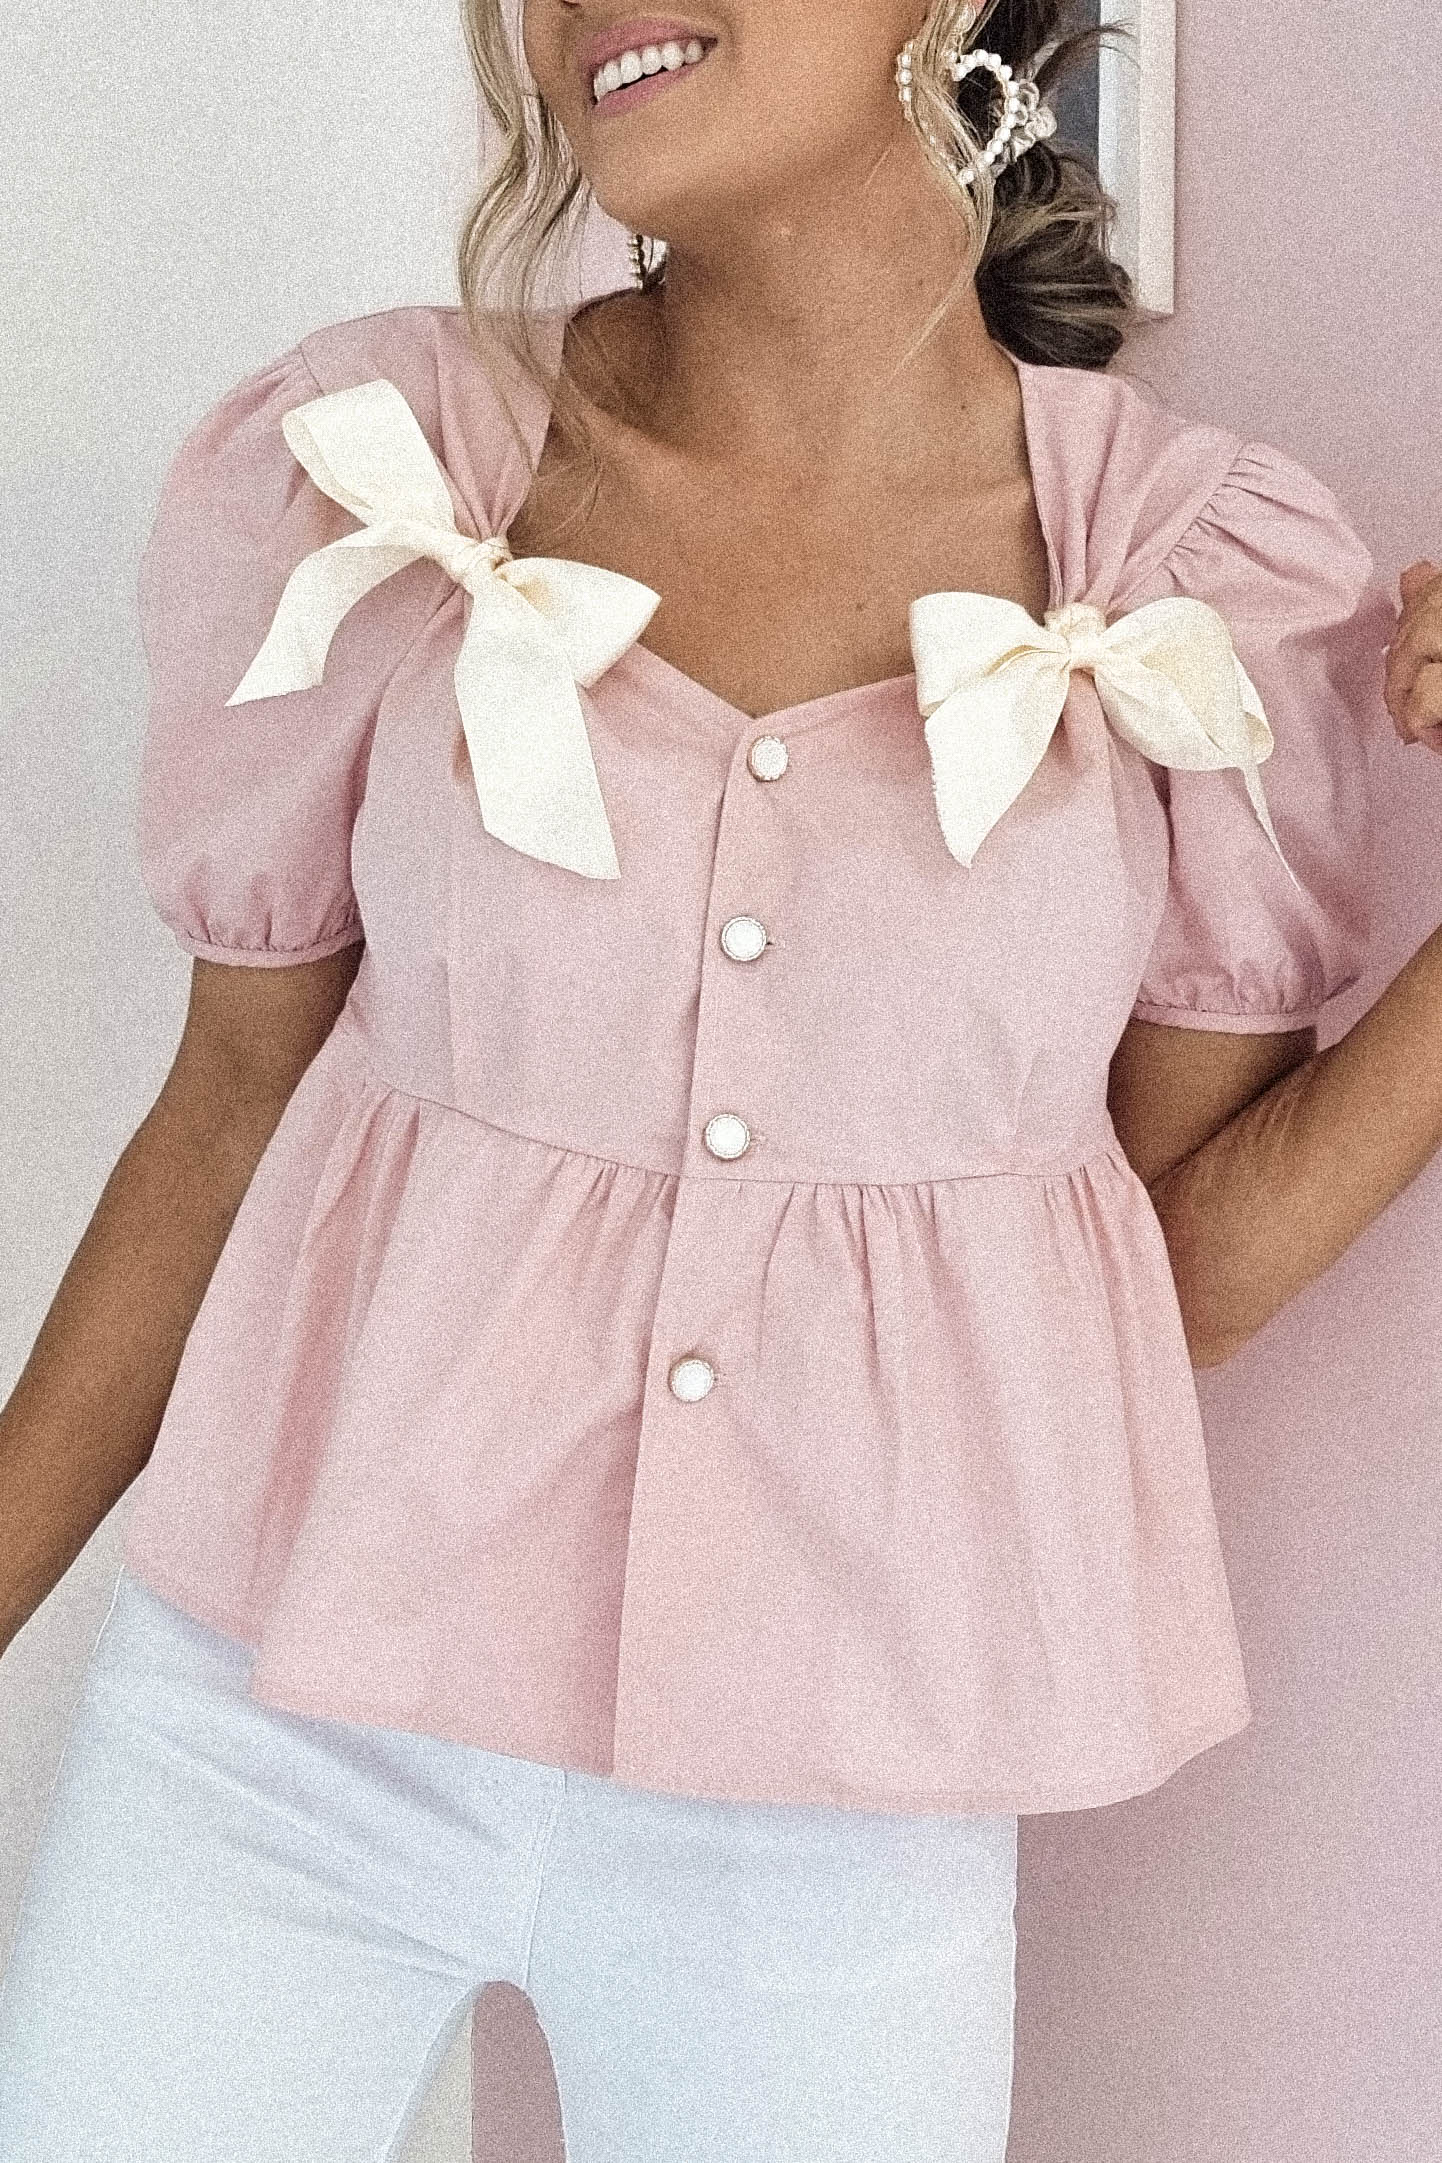 minnie-bow-detail-blouse-pink-minnie-bow-detail-blouse-pink-oh-hello-clothing-28248538218561.jpg